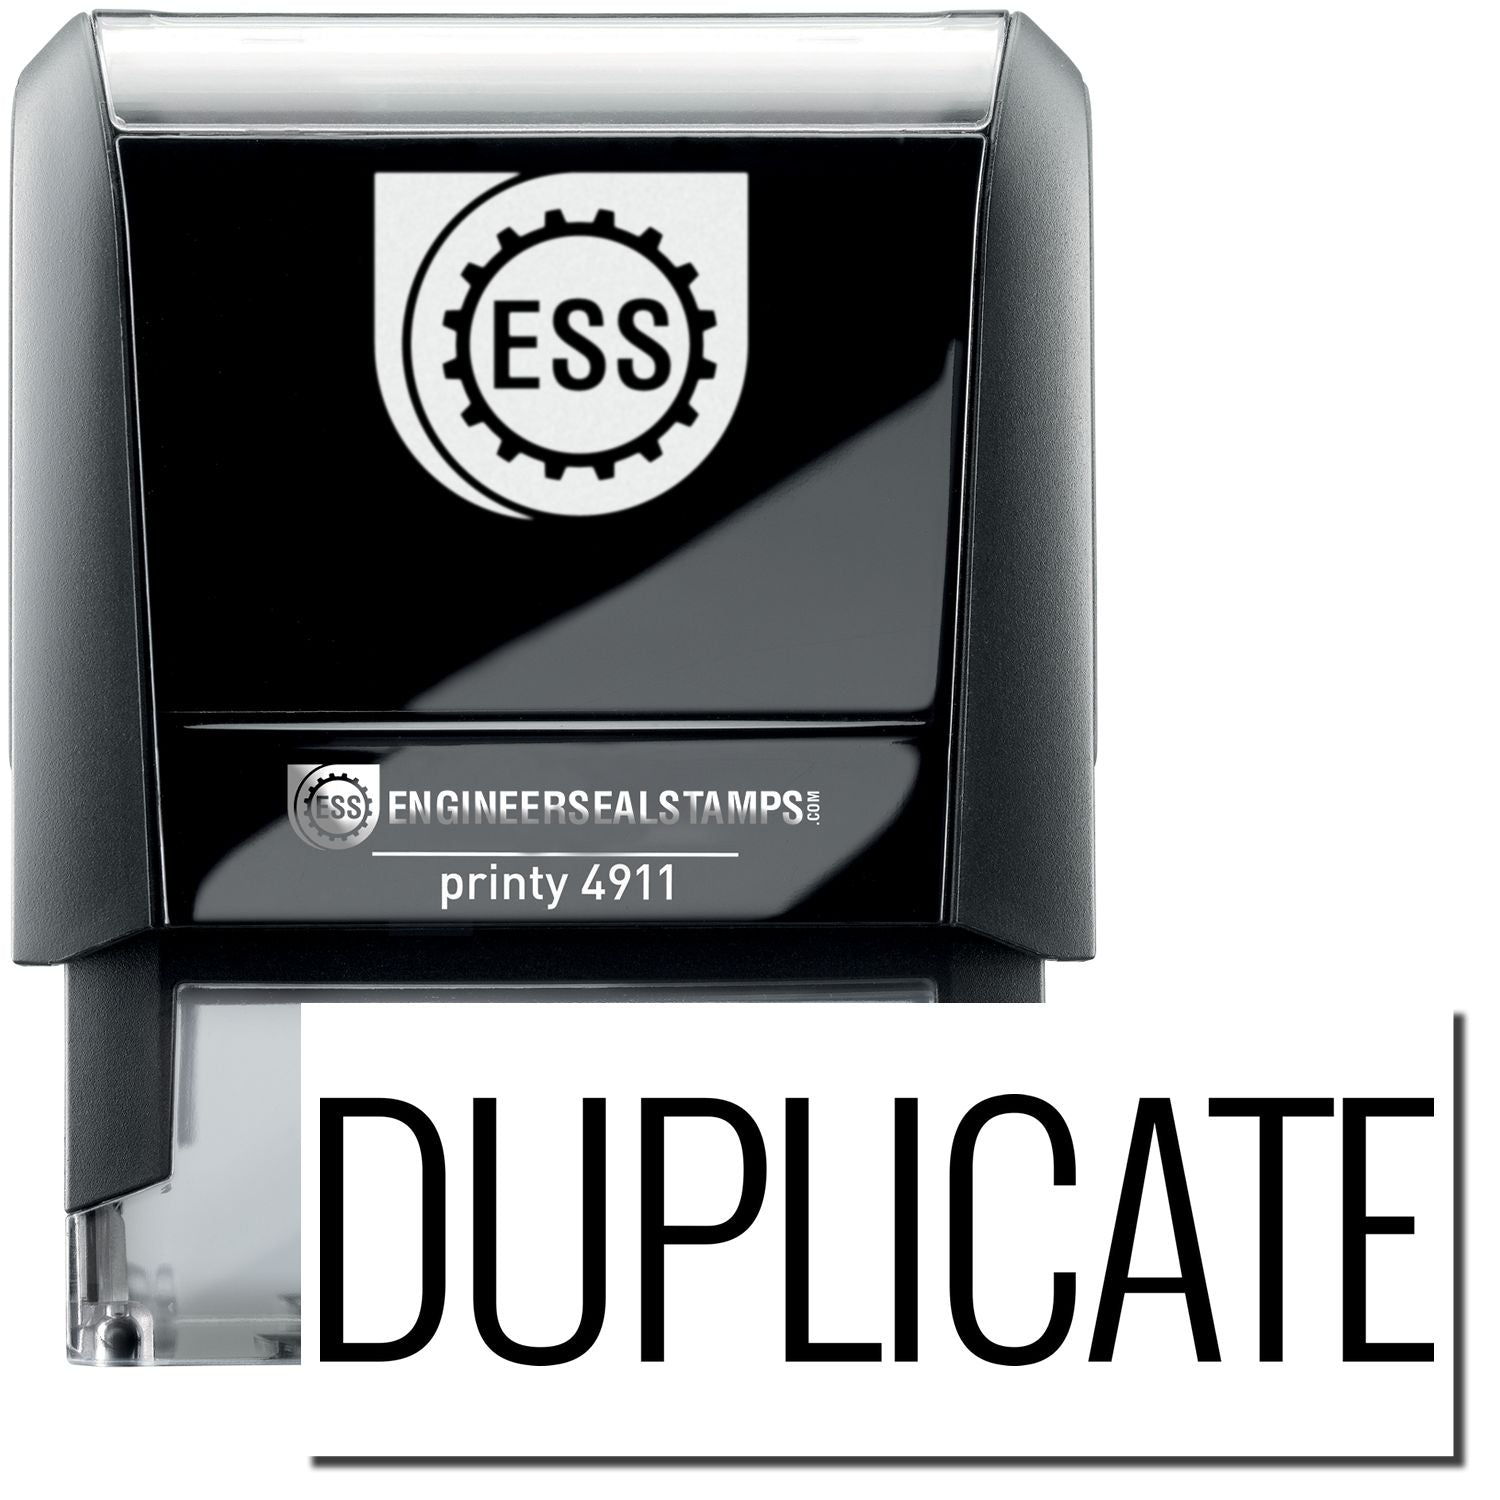 A self-inking stamp with a stamped image showing how the text "DUPLICATE" in a narrow font is displayed after stamping.